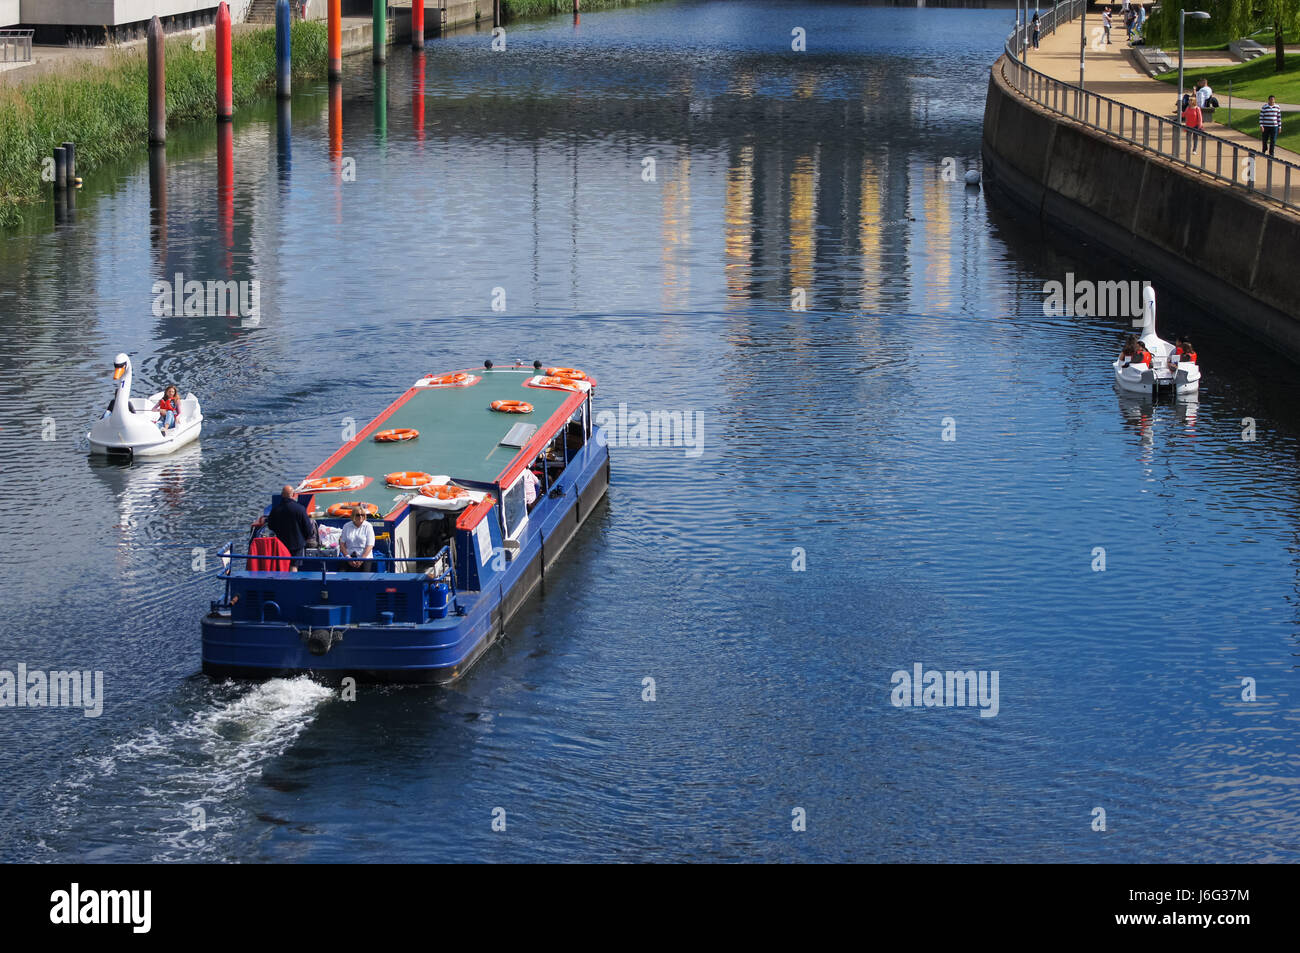 People enjoy hot day in swan pedalos on the river Lea at the Queen Elizabeth Olympic Park, London England United Kingdom UK Stock Photo